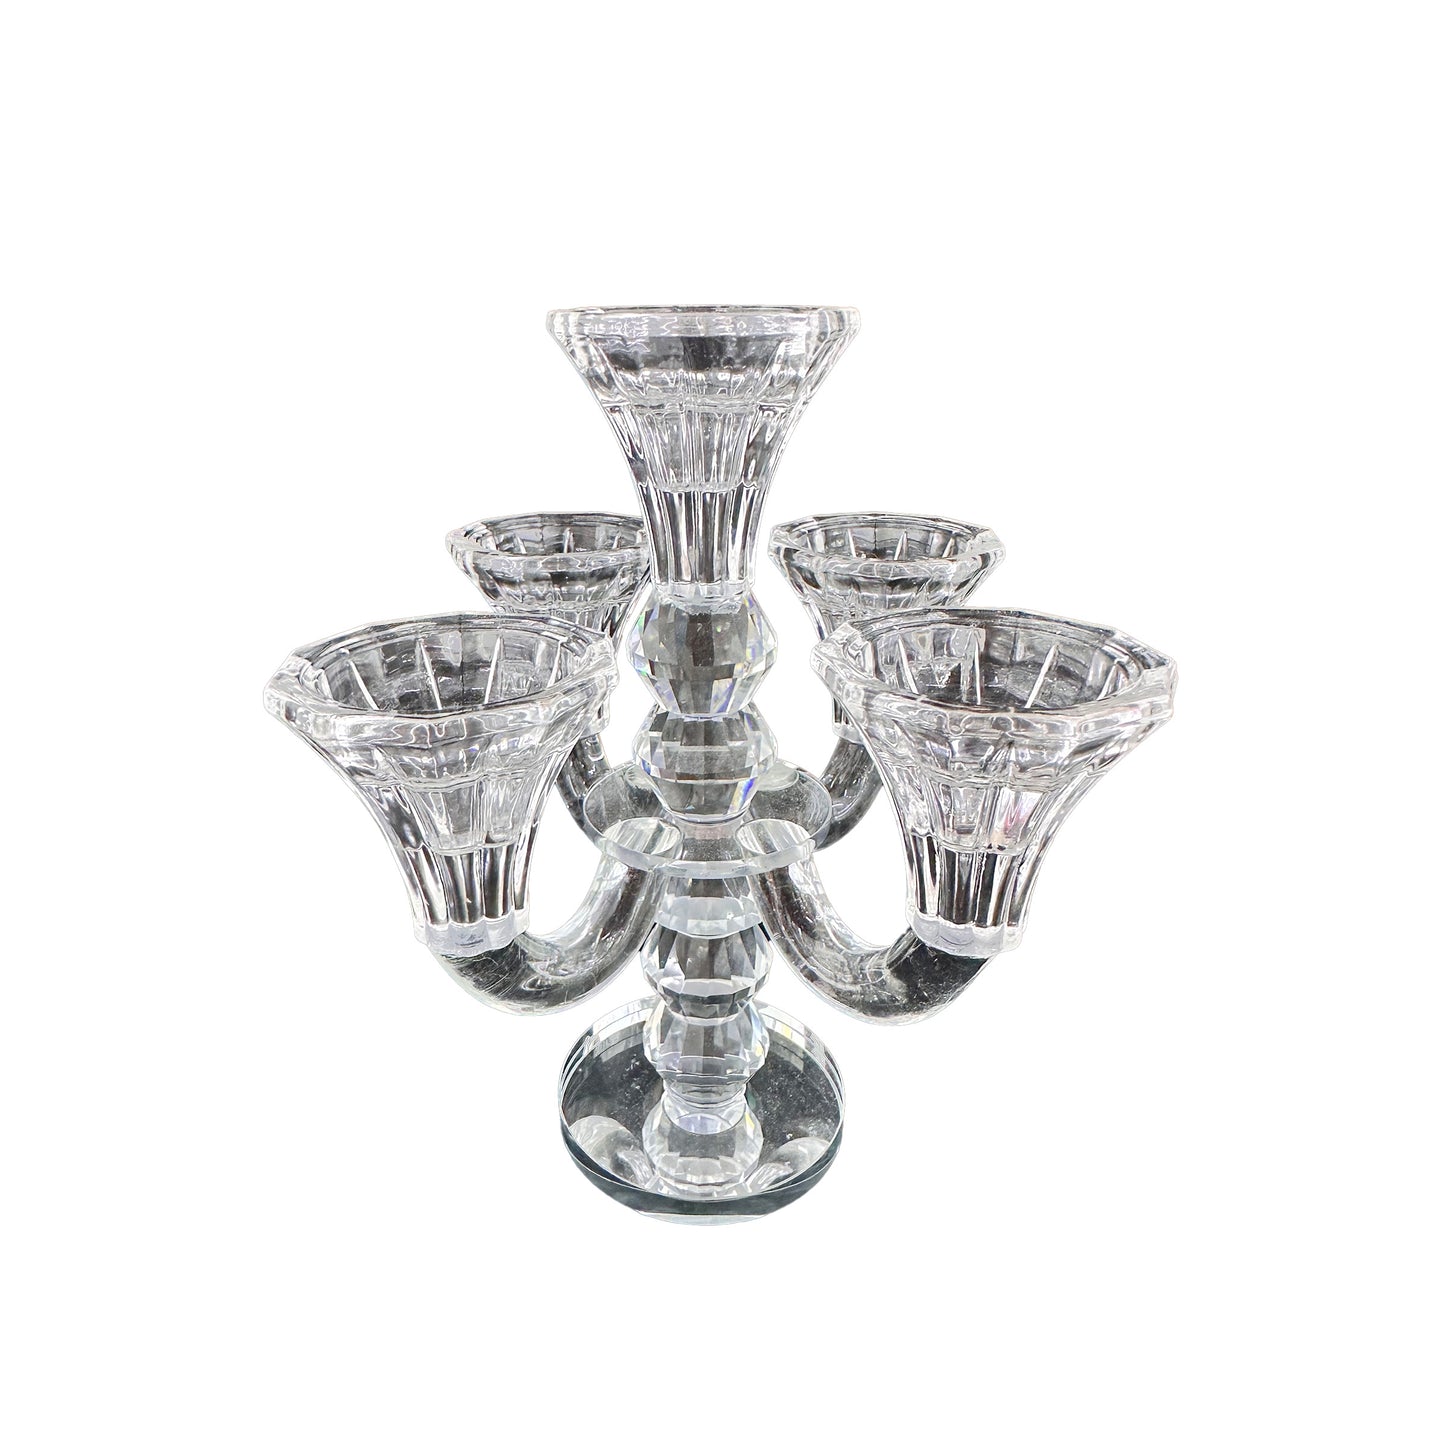 Crystal Candle Holder (5 heads) - H321C-6-5